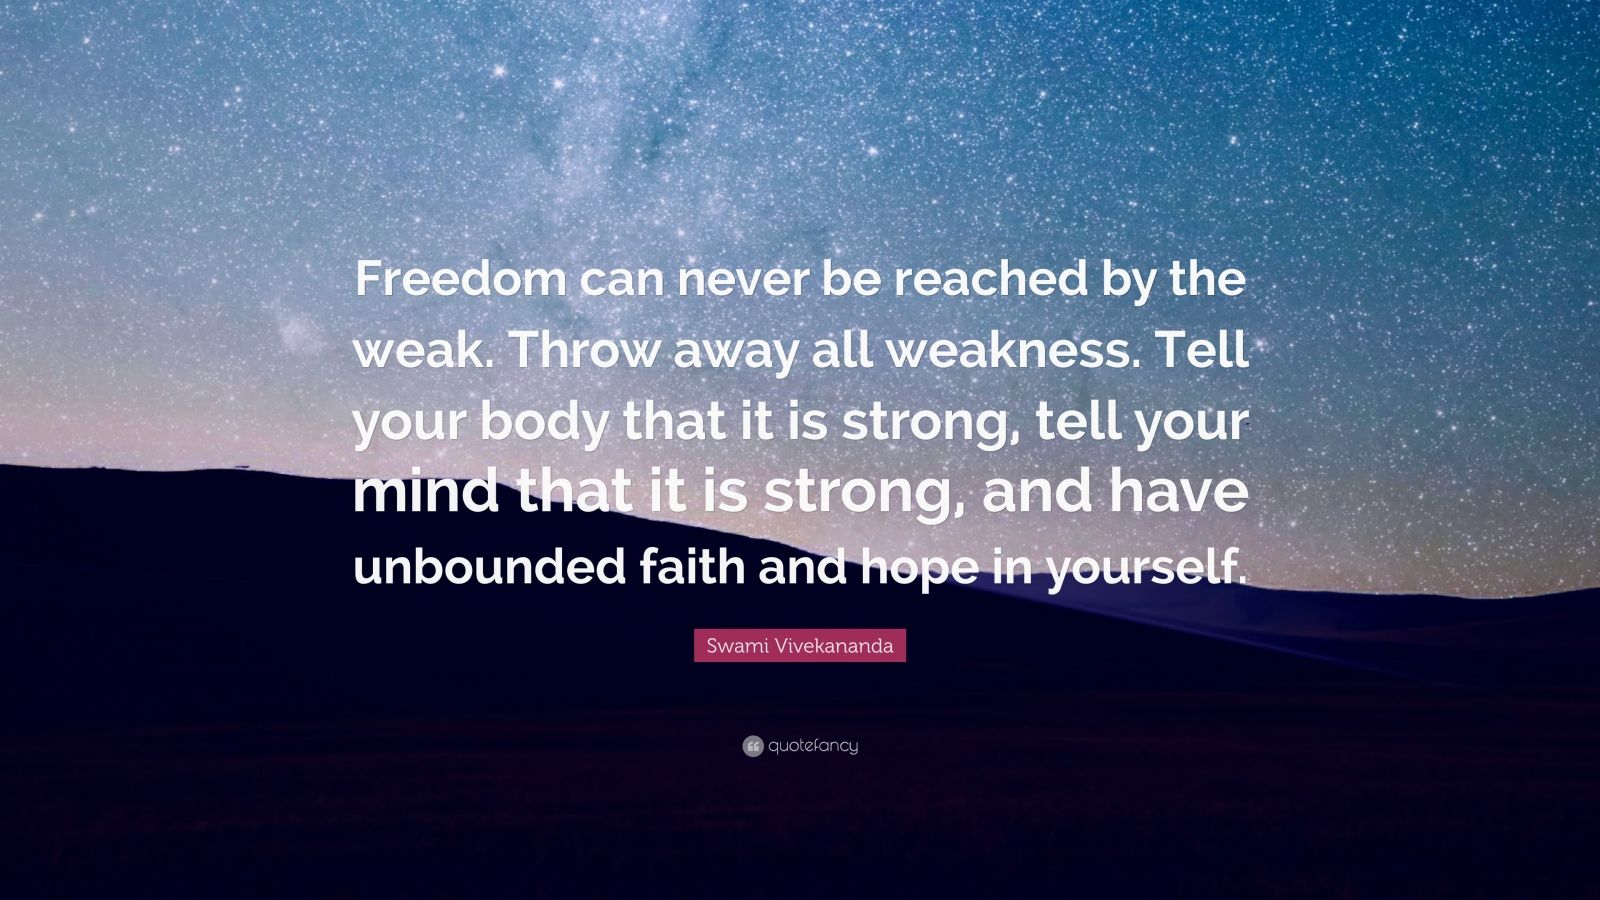 Swami Vivekananda Quote: “Freedom can never be reached by the weak ...